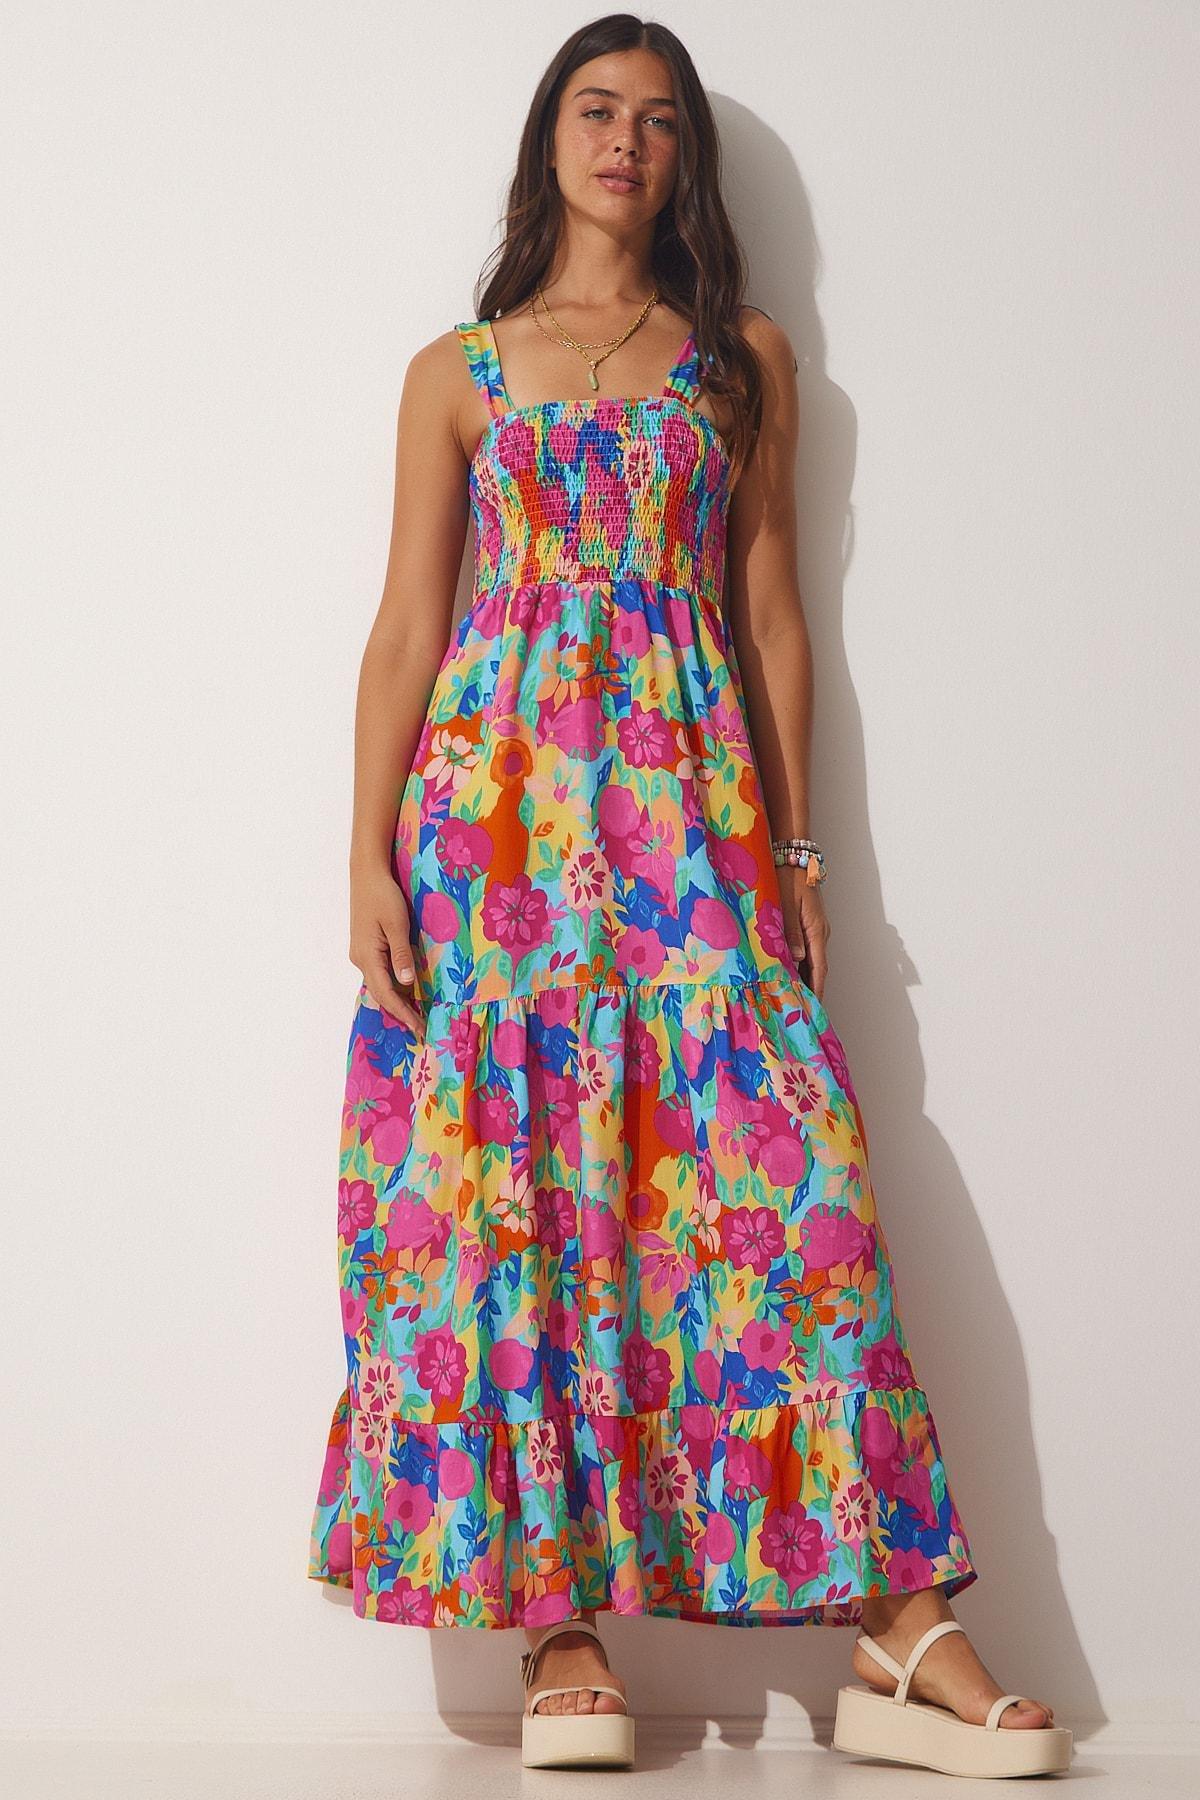 Happiness Istanbul - Multicolour Floral Strapless Summer Knitted Dress